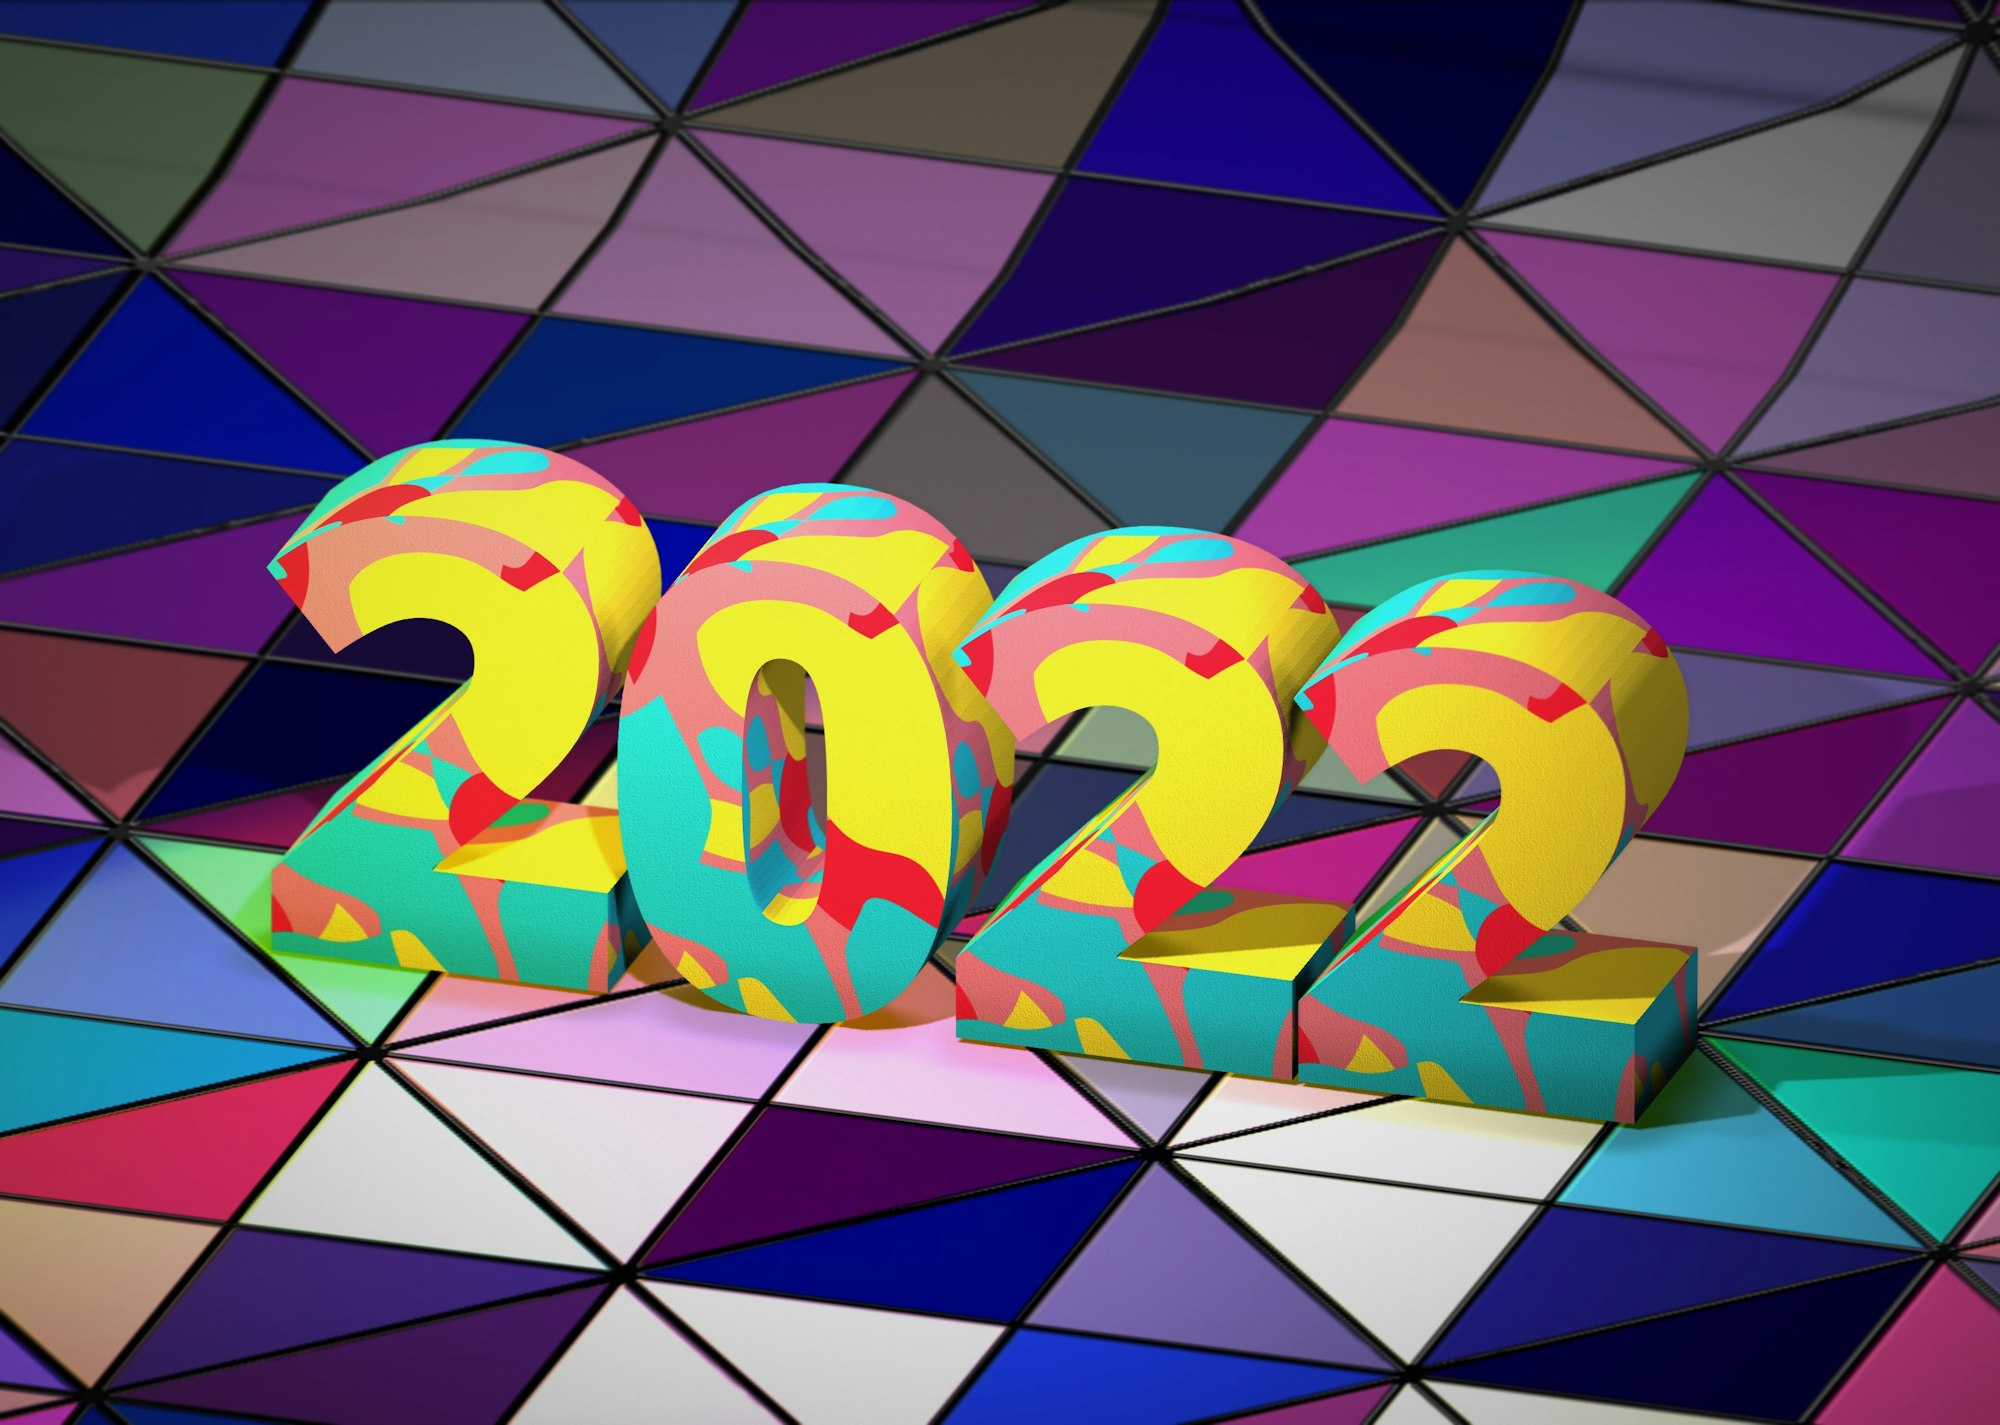 The year 2022 against a colourful background  